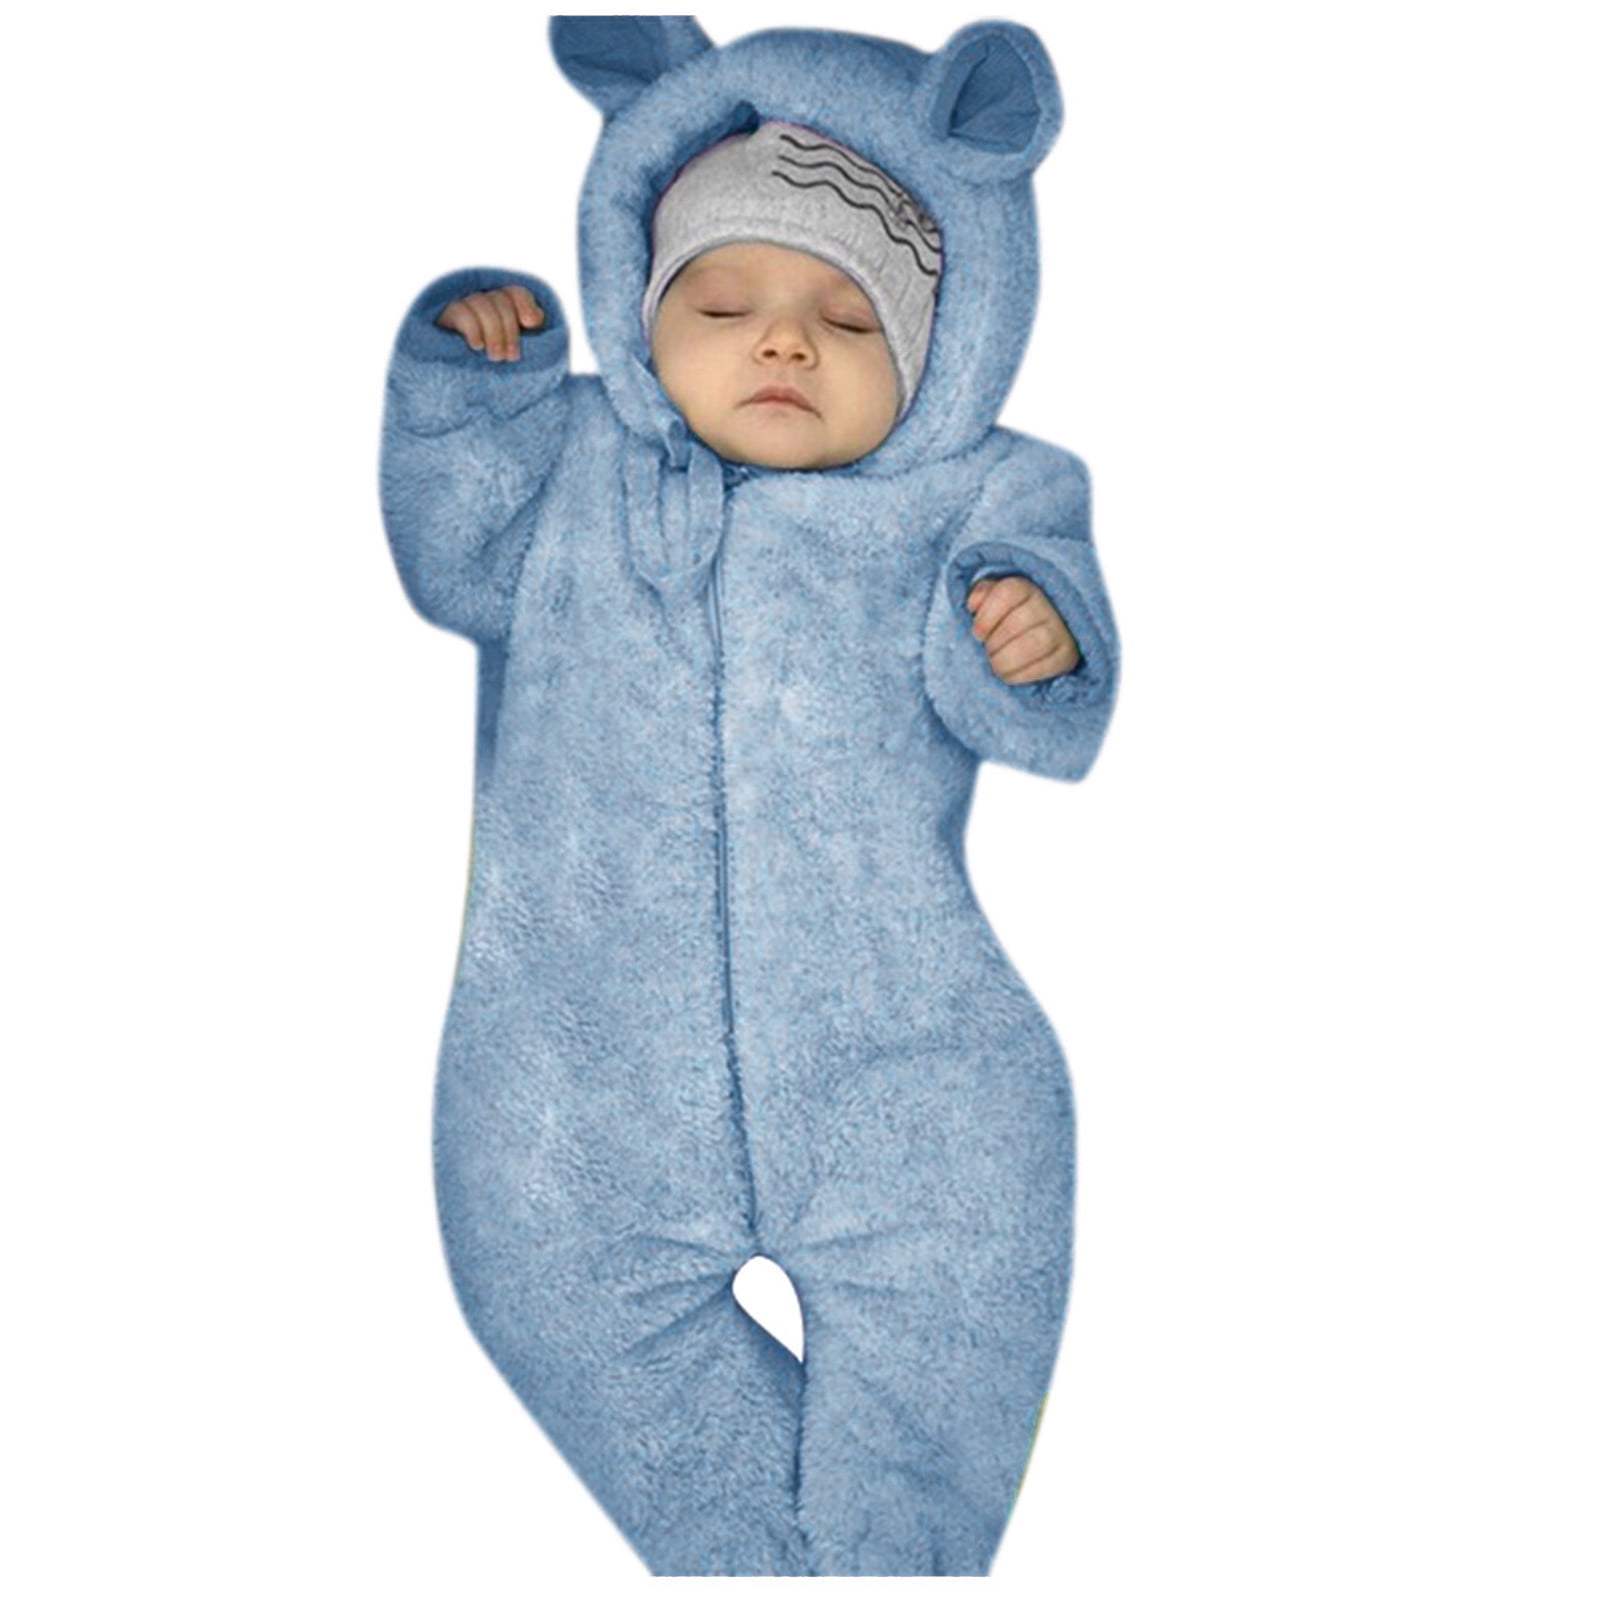 Buy EXCLUZO Unisex Baby Clothes Cute Baby Snowsuit Hooded Bodysuit Long  Sleeve Onesies Outfit Zip r Fall Winter al Fleece Jumpsuit for Infant Baby  Boys Girls Clothing at Amazon.in